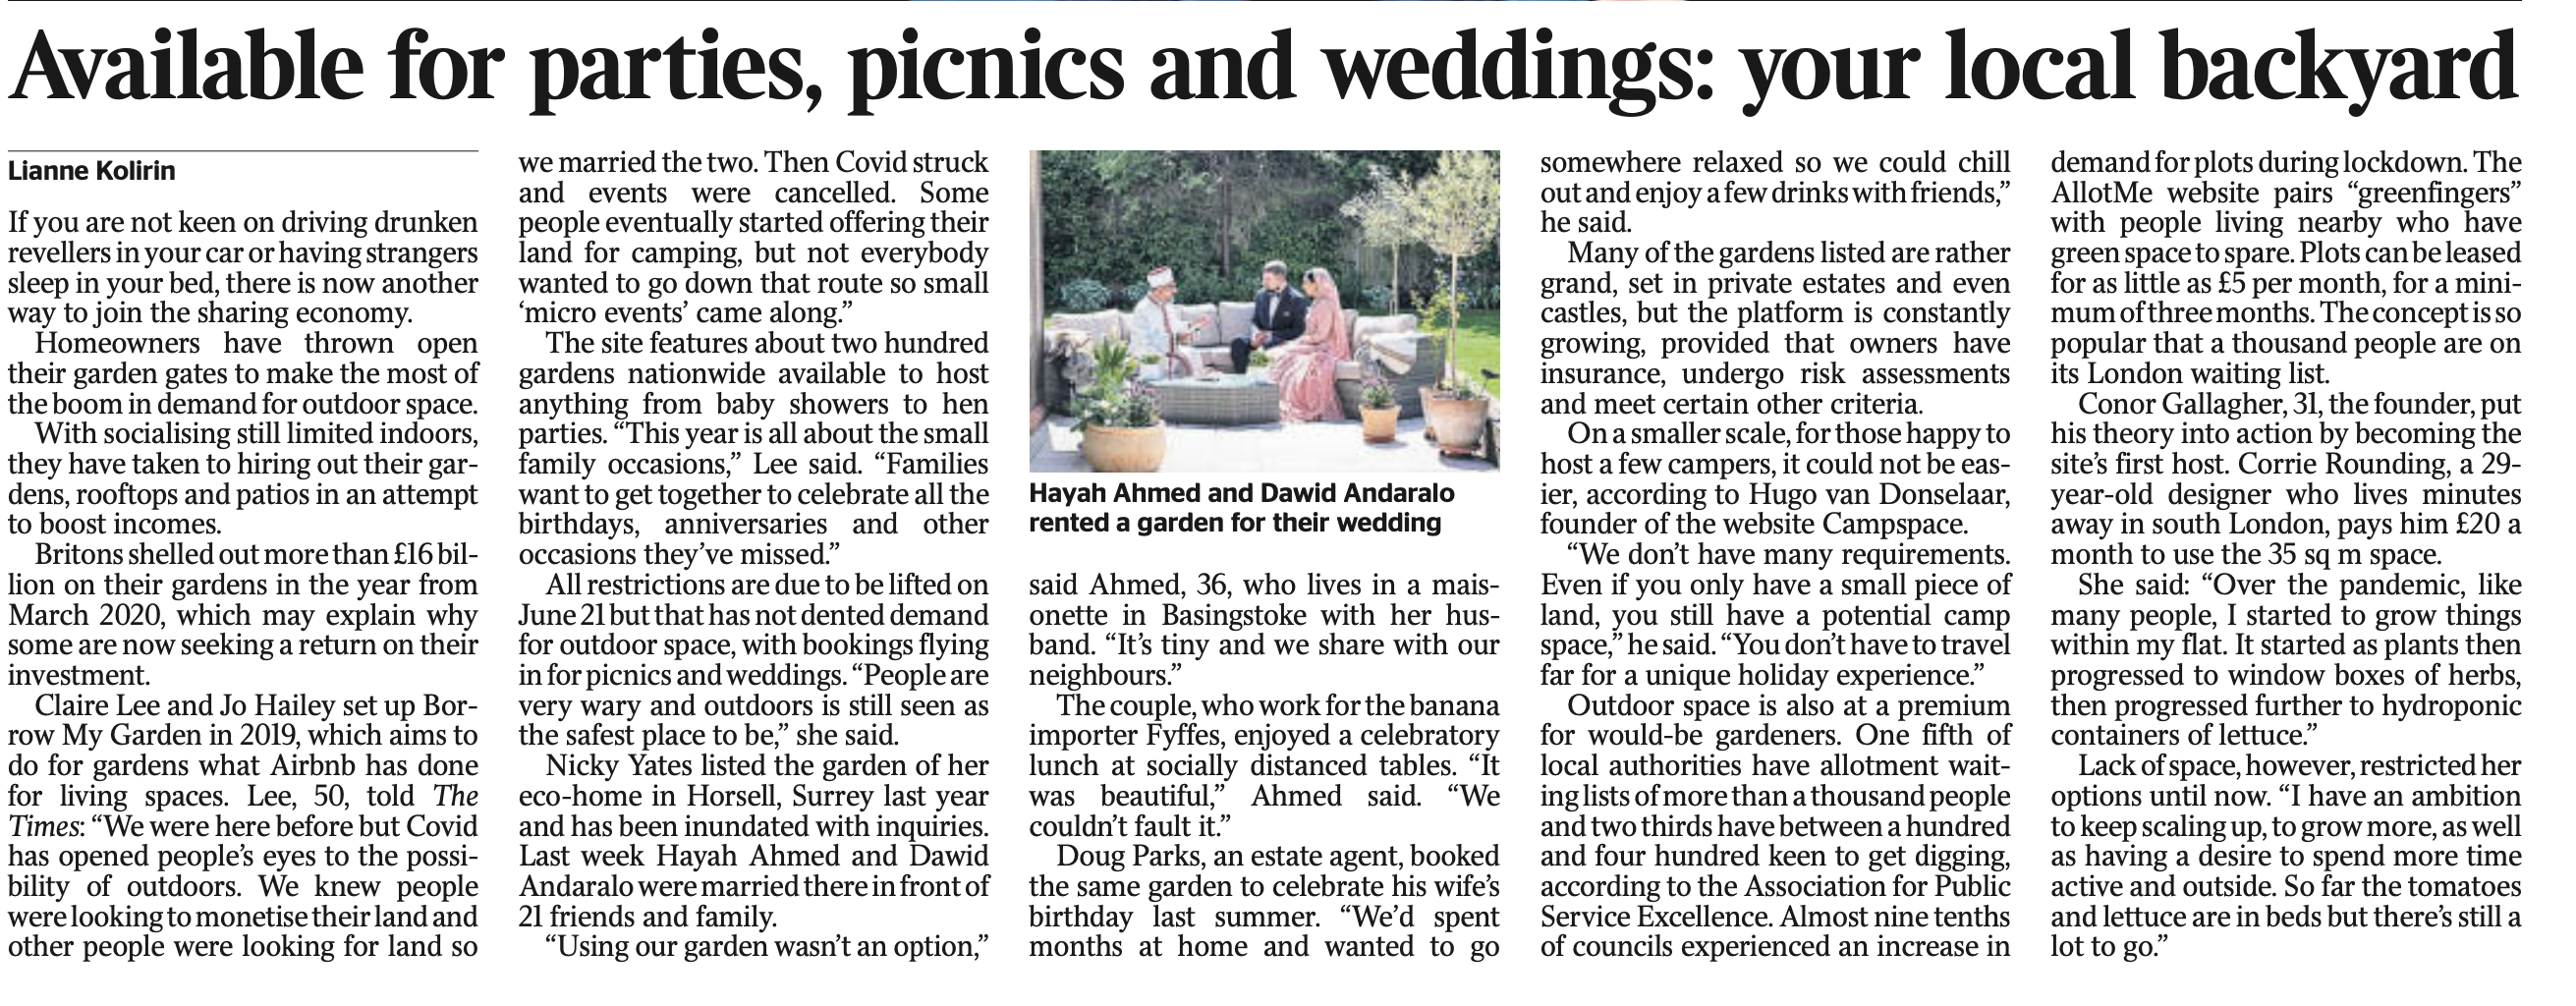 24 May, 2021 — The Times about what to do with your local backyard